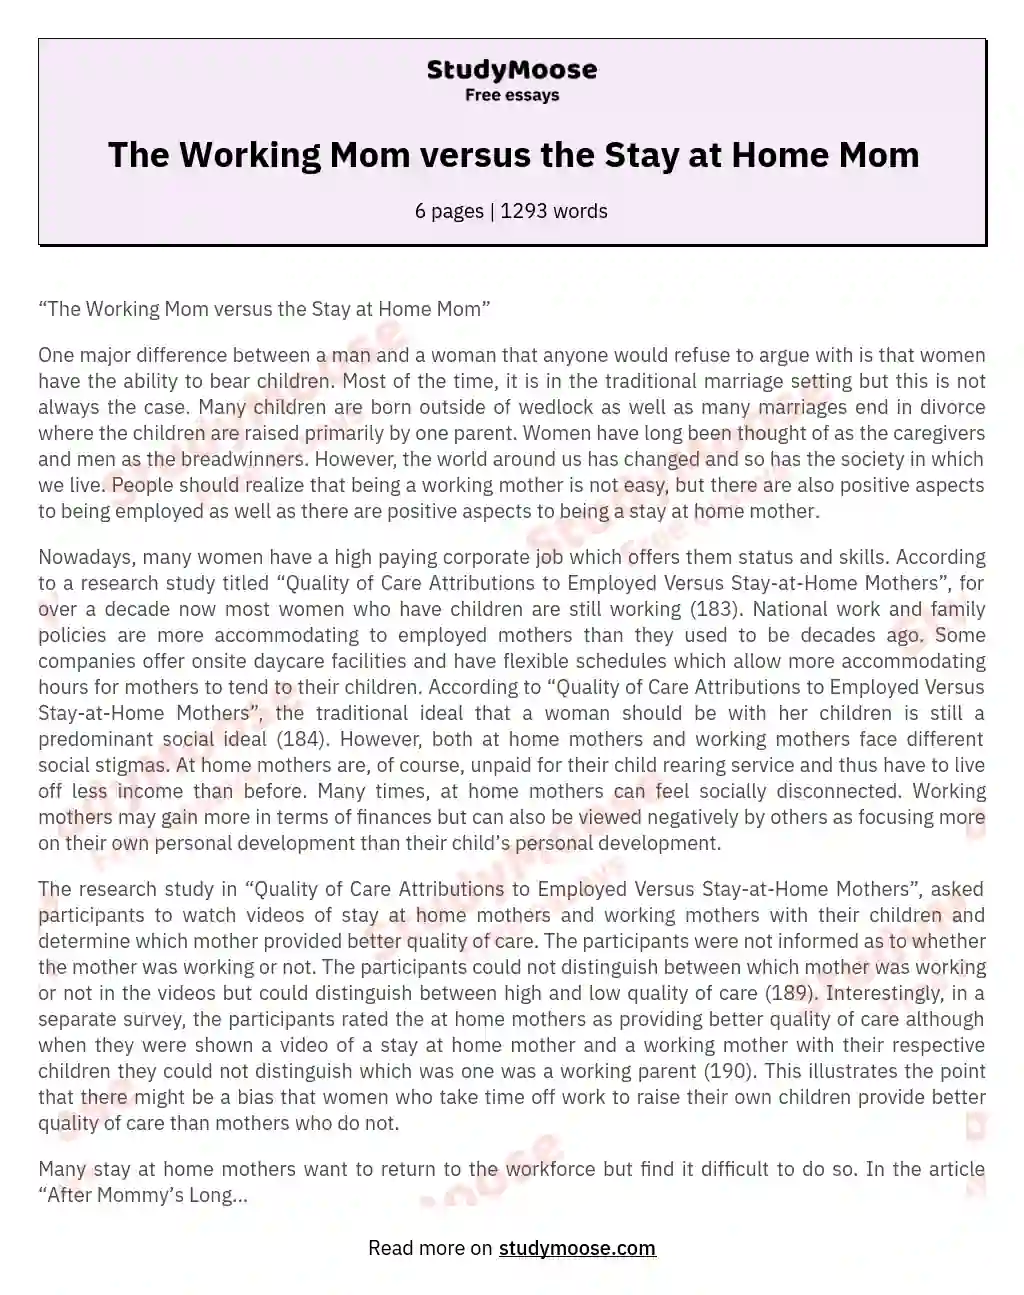 The Working Mom versus the Stay at Home Mom